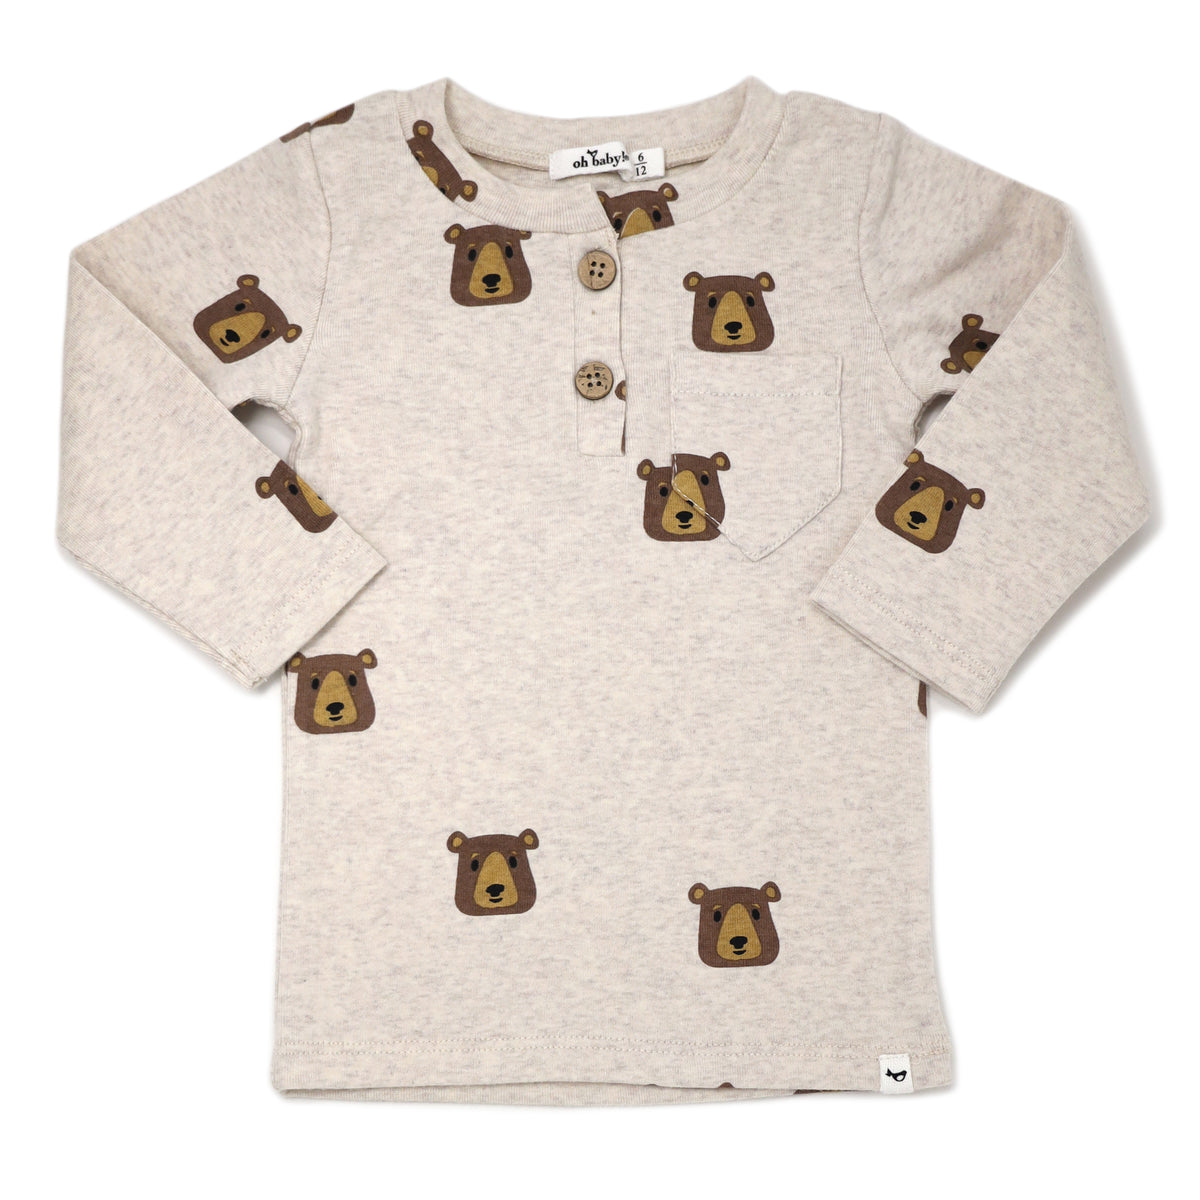 oh baby! Long Sleeve Henley Tee with Brown Bear Faces Print - Sand